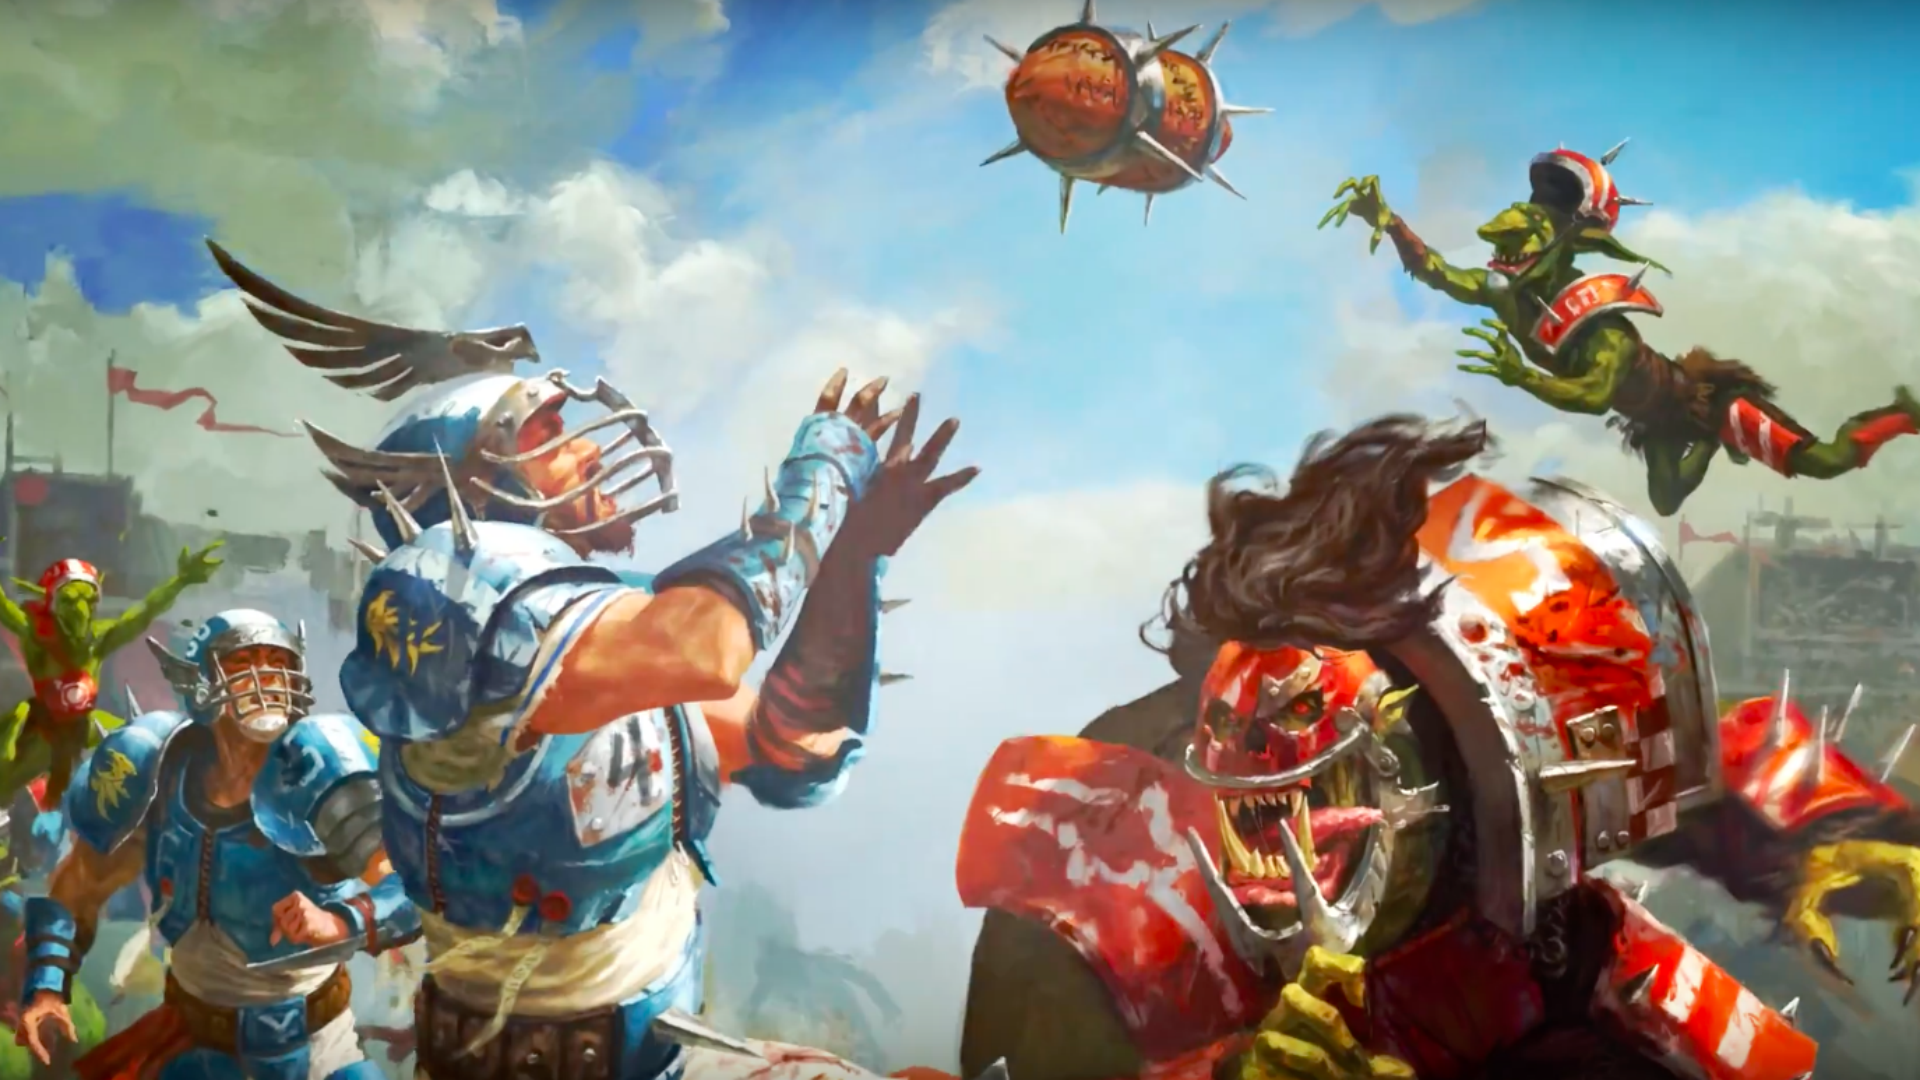 ps4 blood bowl 2 review